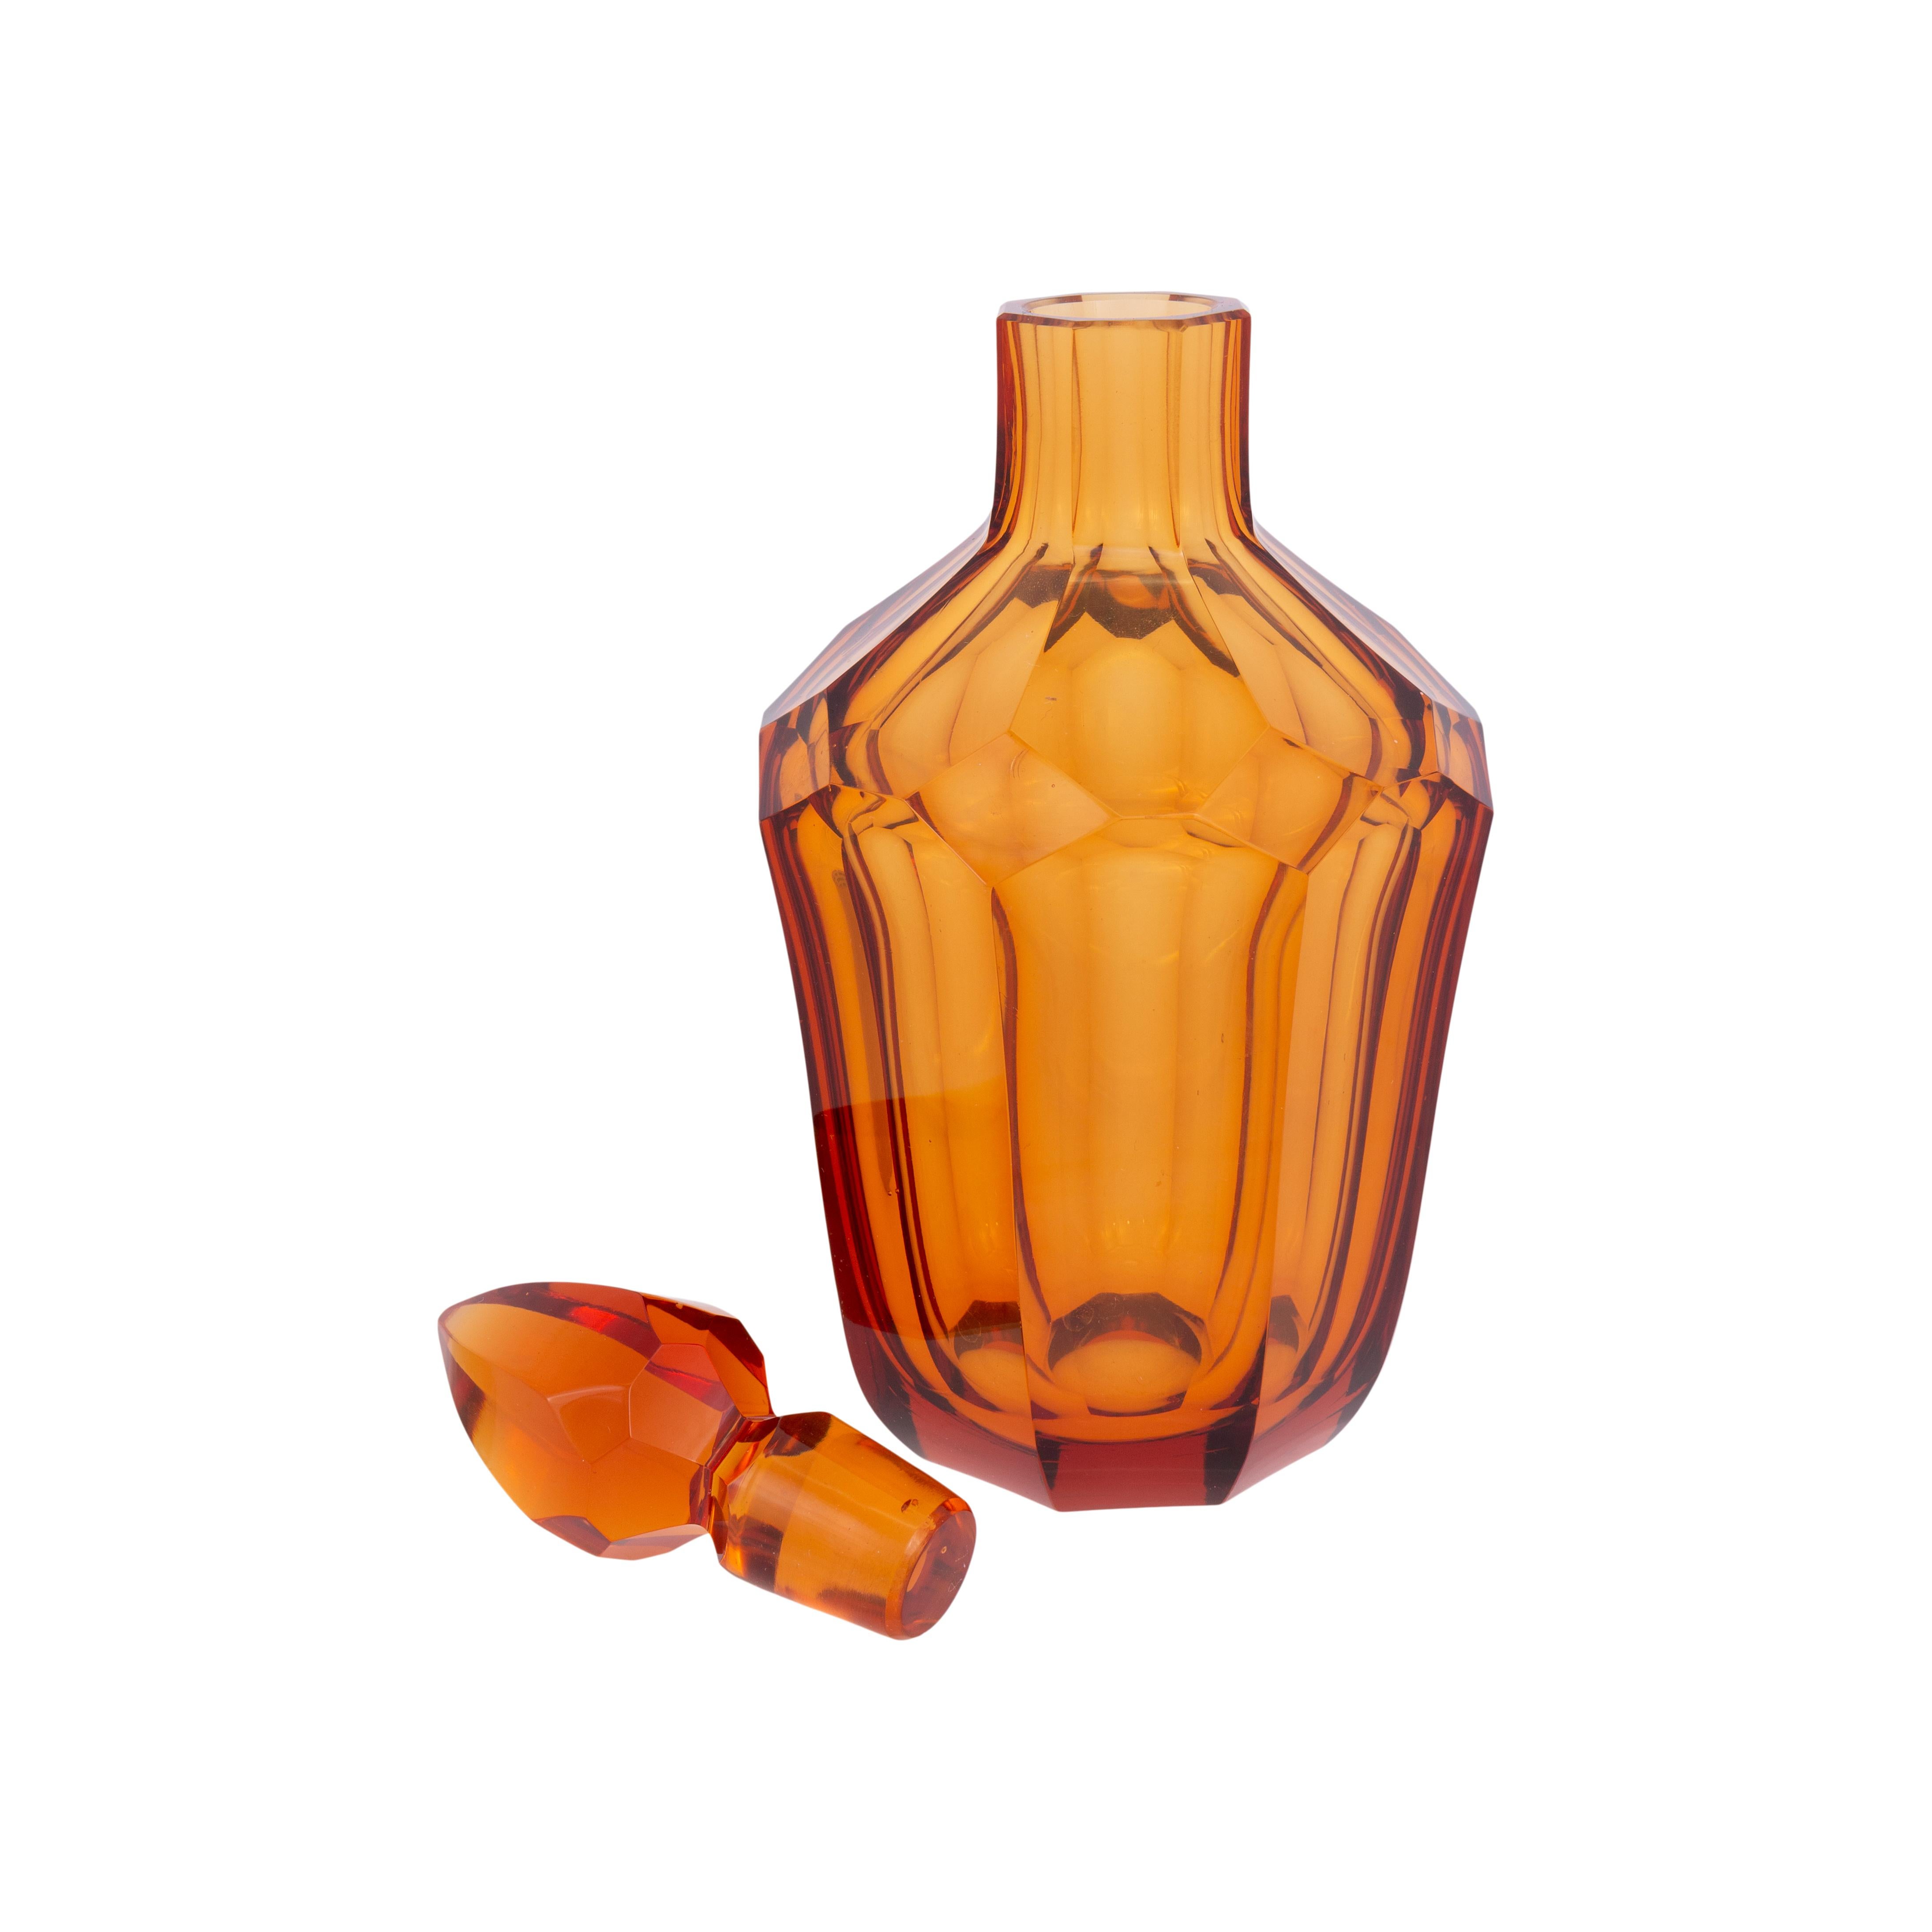 Stunning amber fluted back bar bottle with spear tip.

Period: Last quarter 19th century
Origin: United States
Size: 4